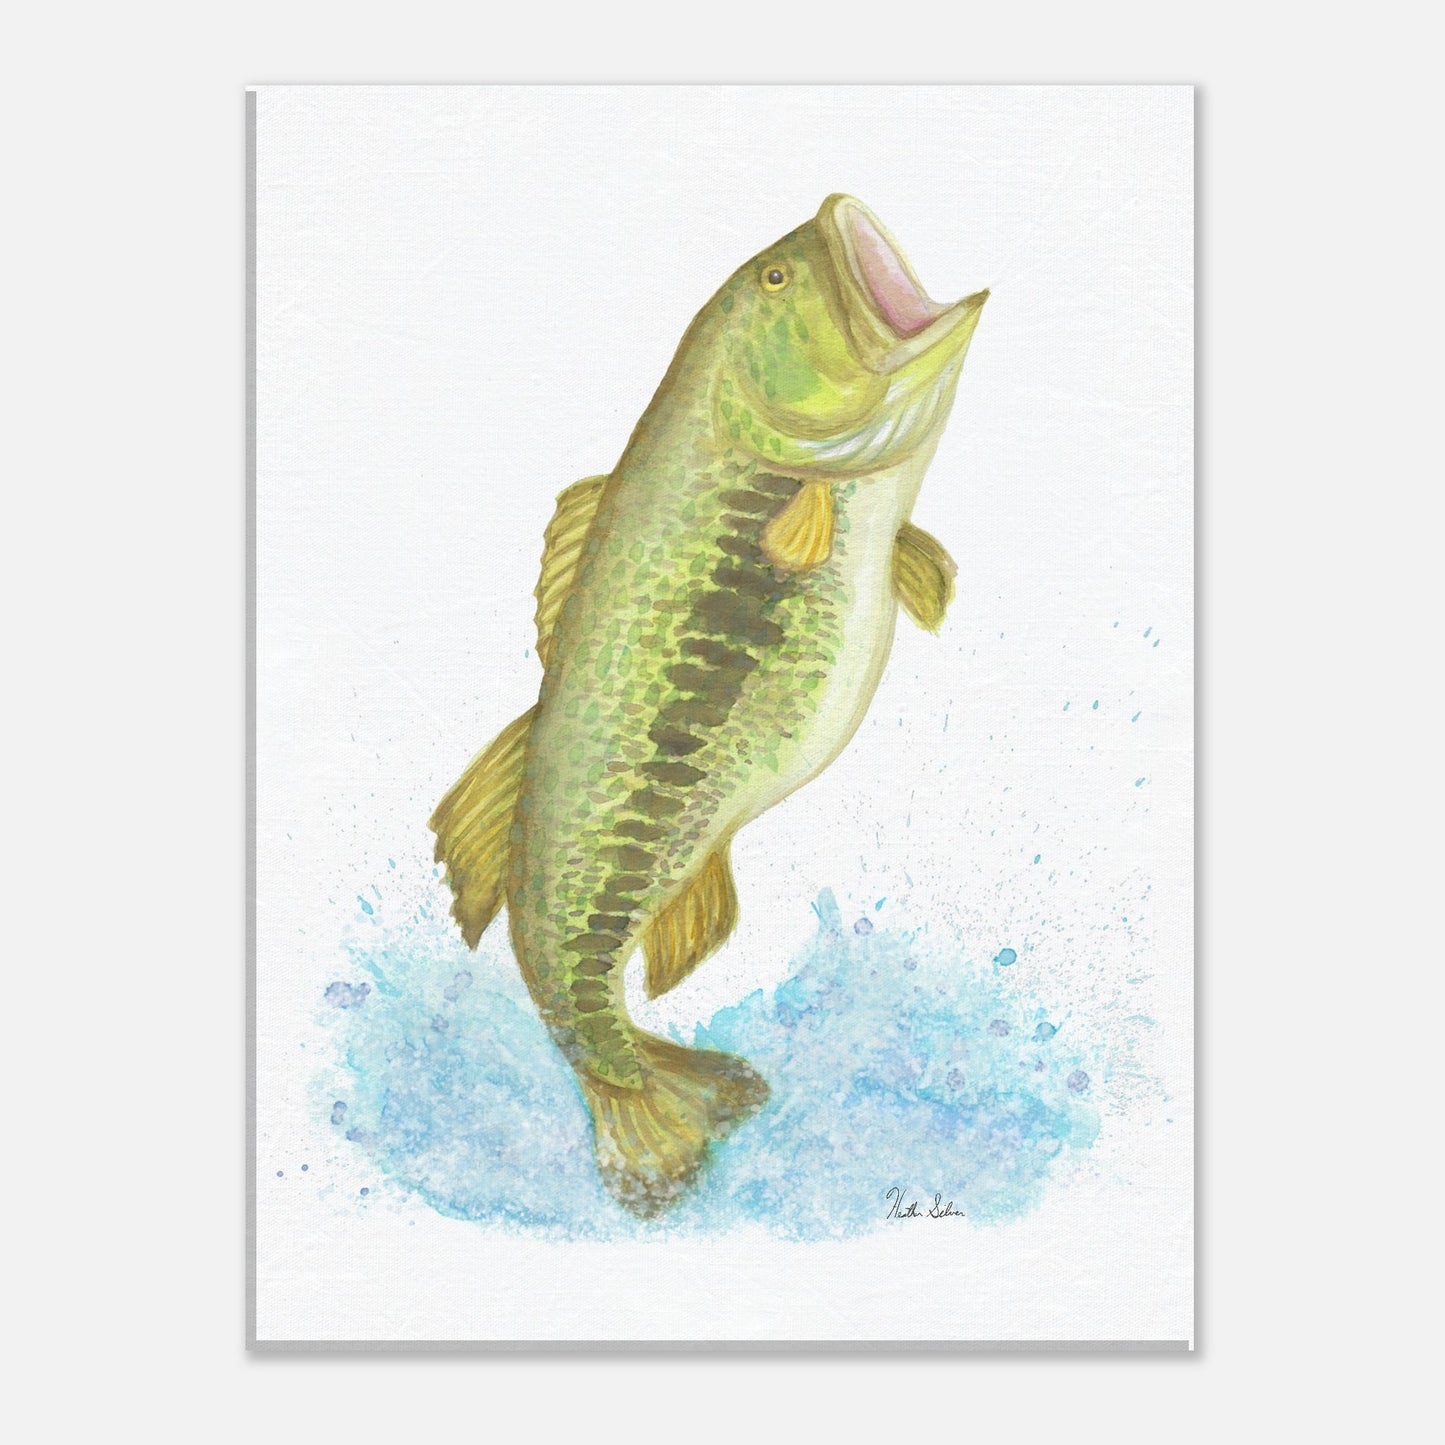 12 by 16 inch slim canvas wall art print featuring a watercolor painting of a largemouth bass leaping from the water. Hanging hardware included.